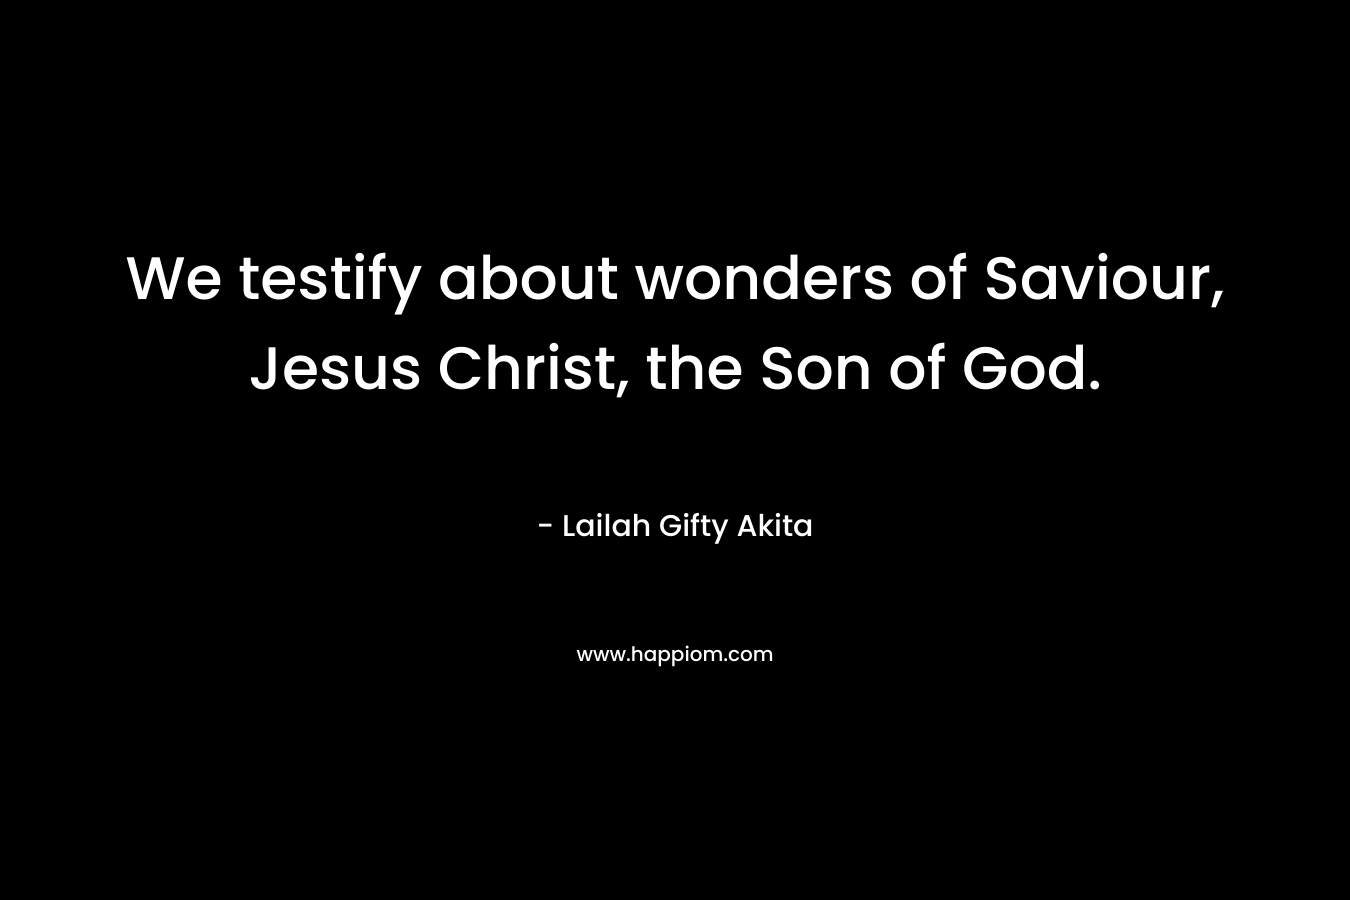 We testify about wonders of Saviour, Jesus Christ, the Son of God. – Lailah Gifty Akita